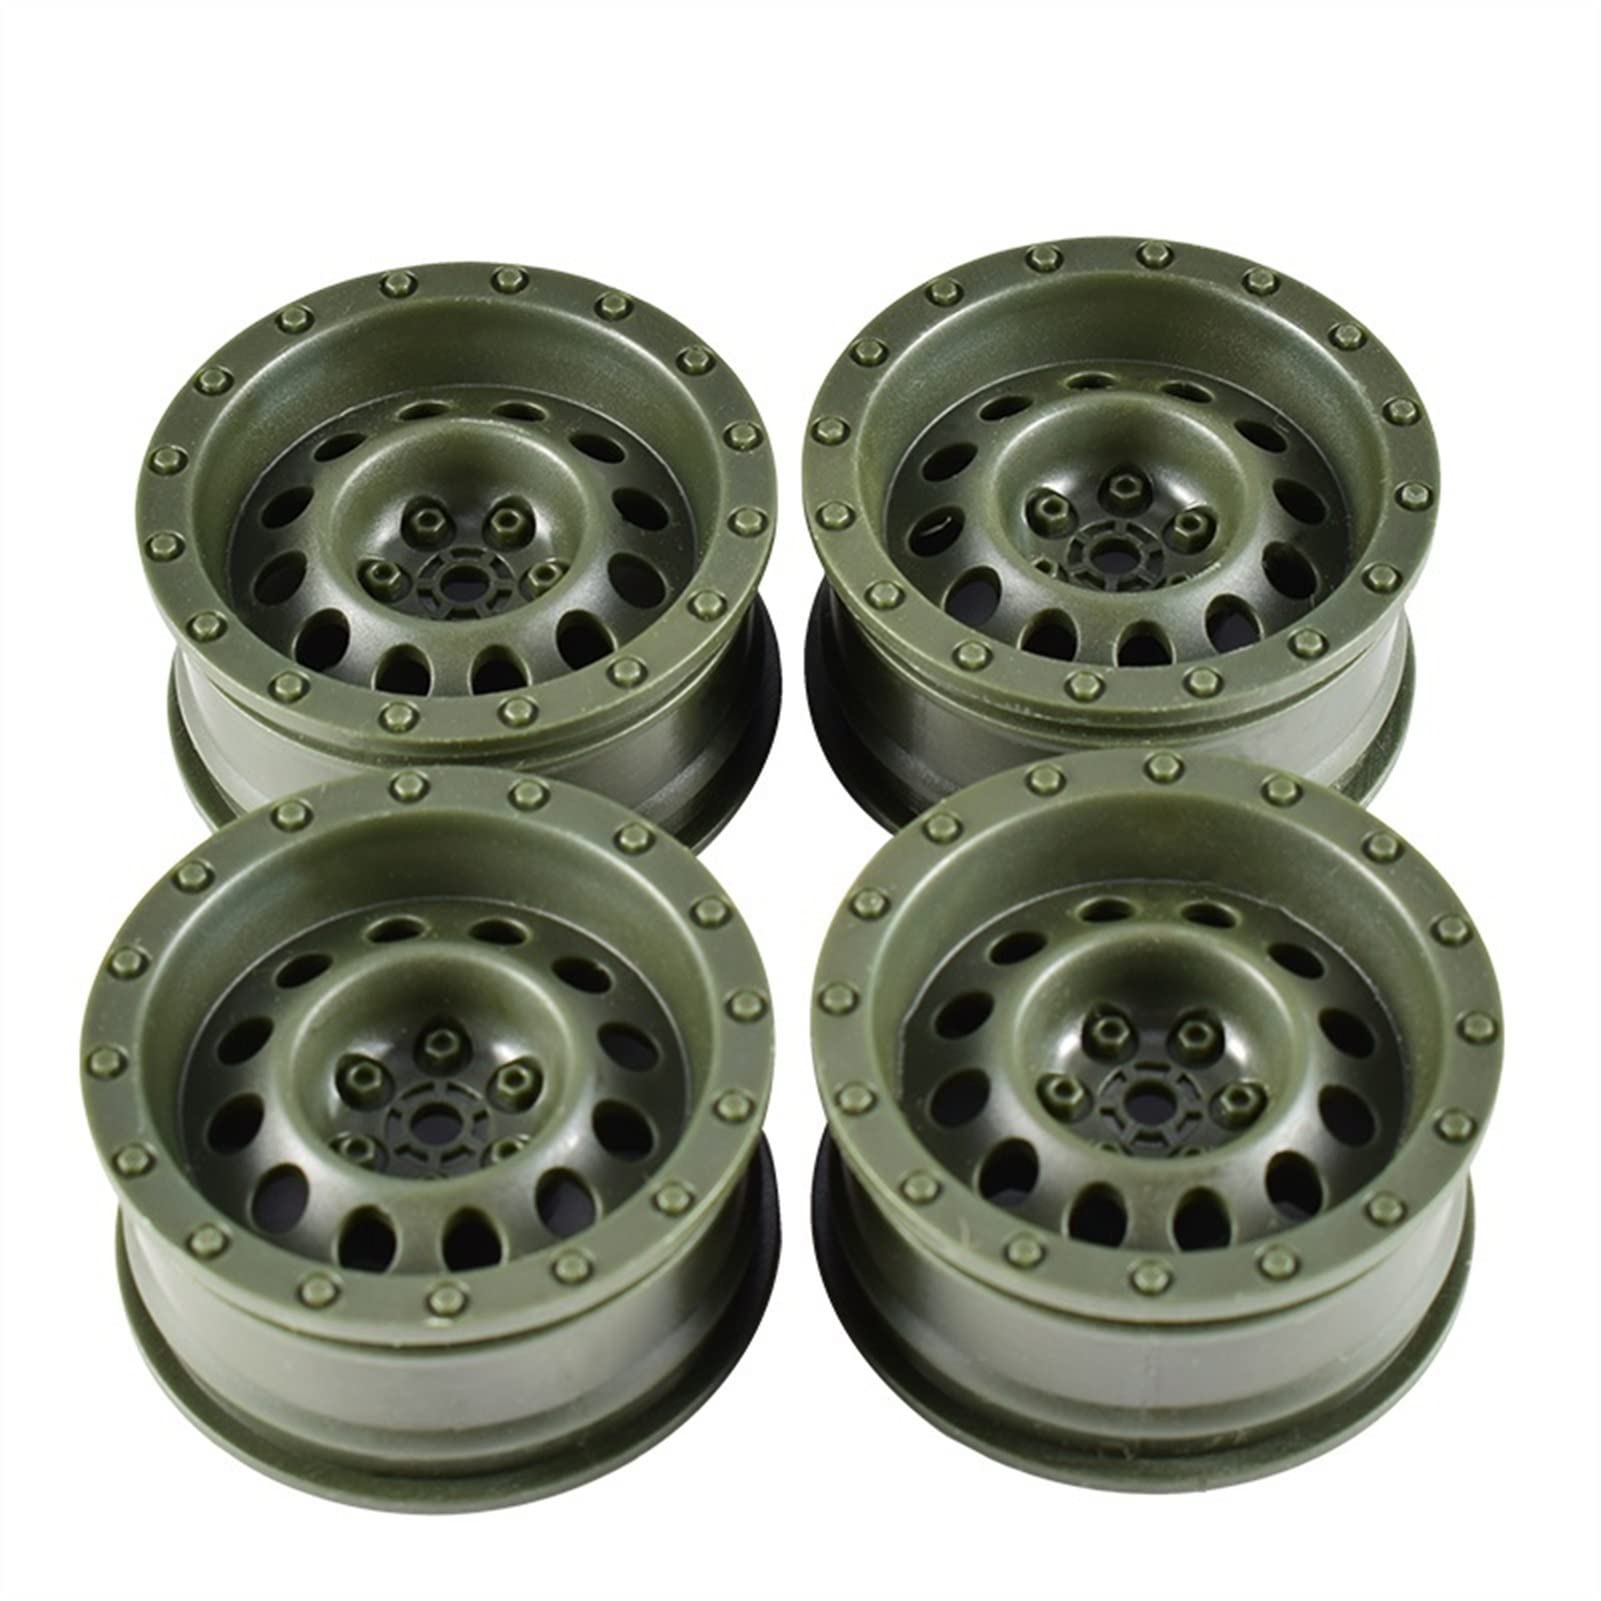 DOFABI 4PCS 1/10 RC Auto ABS 1, 9 Zoll Felge, for Axial, SCX10 90046 D90, for, for Traxxas, TRX- 4 AXI03007, for, for Tamiya, D90 RC Crawler Rad Hex RC-Autoräder(Green) von DOFABI